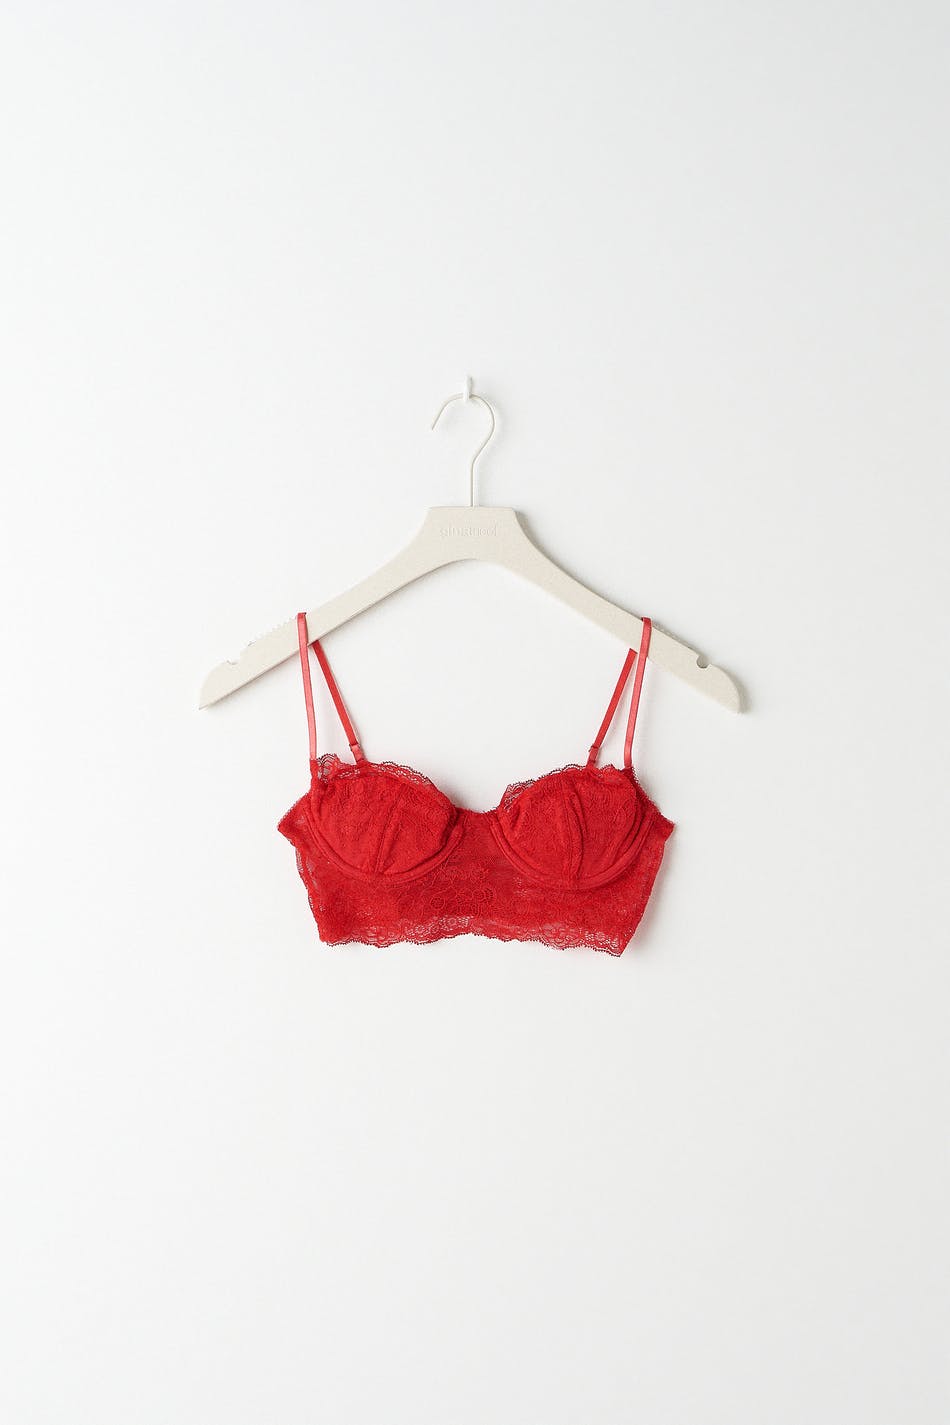 Gina Tricot Lina lace bralette XL  True red (3739)